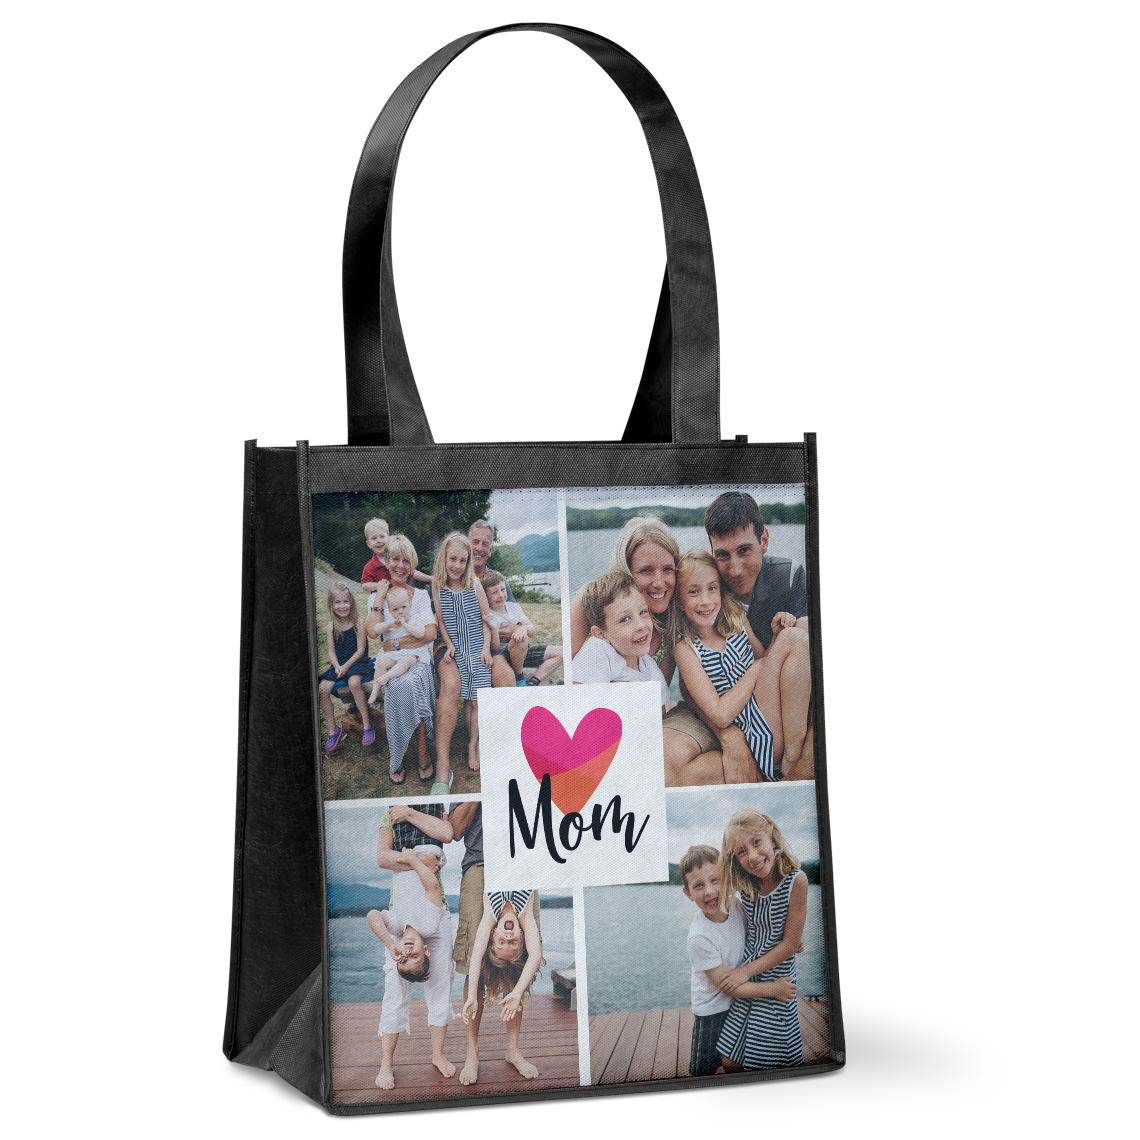 11 Best Reusable Shopping Bags - Causeartist